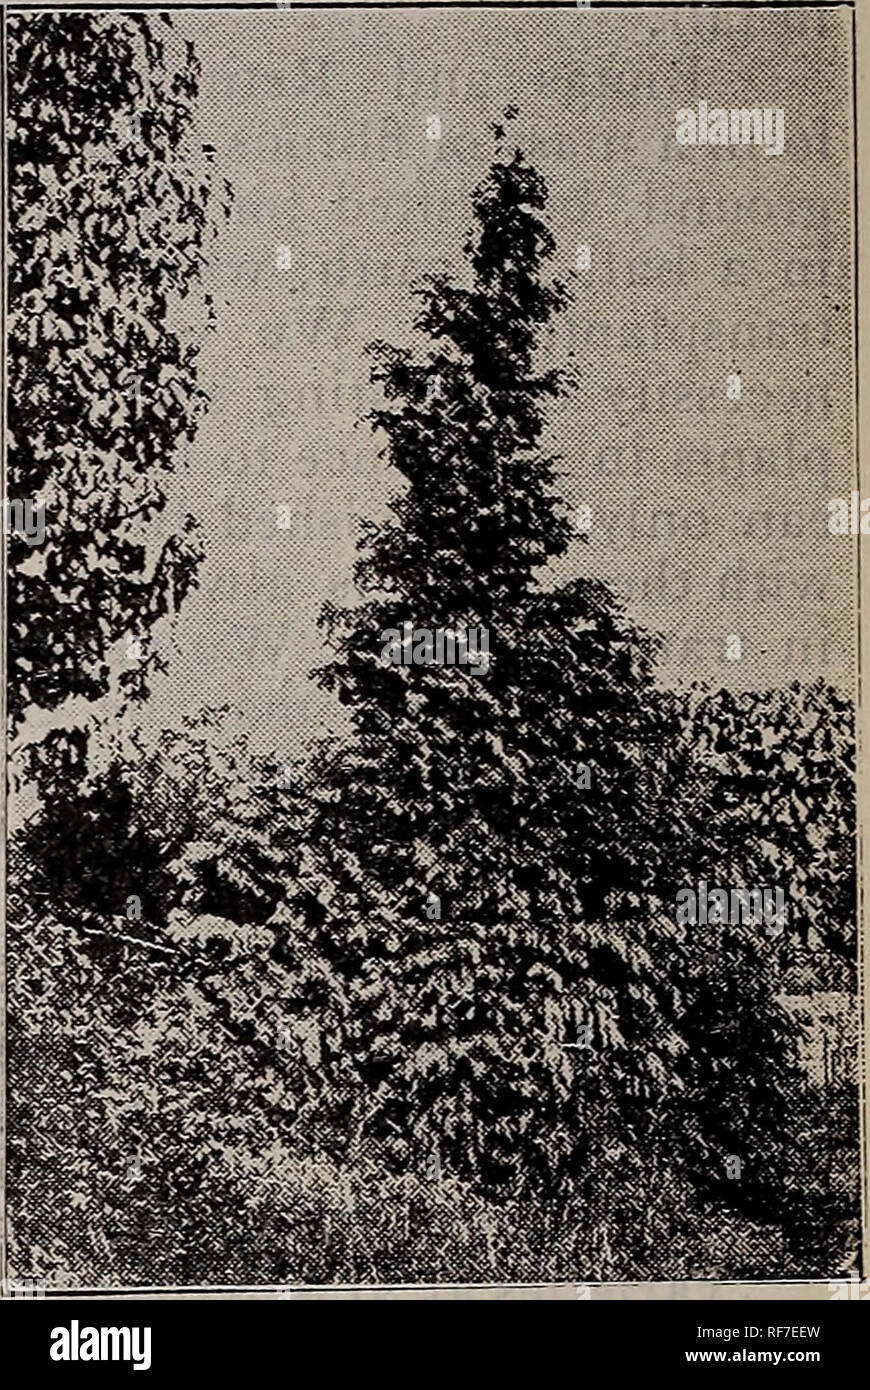 . Fruitland Nurseries. Nurseries (Horticulture) Georgia Augusta Catalogs; Fruit trees Seedlings Catalogs; Fruit Catalogs; Trees Seedlings Catalogs; Plants, Ornamental Catalogs; Flowers Catalogs. CUPRESSUS LAWS ONI ANA. CEDRUS DEODARA AT FRUITLAND. CUPRESSUS (Cypress) Small plants, 12 to 15 inches, 25 cents each, $2 for 10 ; larger specimens, 18 to 24 inches, 50 cents each, $4 for 10; 30 to 36 inches, 75 cents each, $6 for 10. Of this section we grow many varieties, which are remarkably well adapted to the middle and subtropi- cal sections of the South. All are graceful trees, varying in habit  Stock Photo